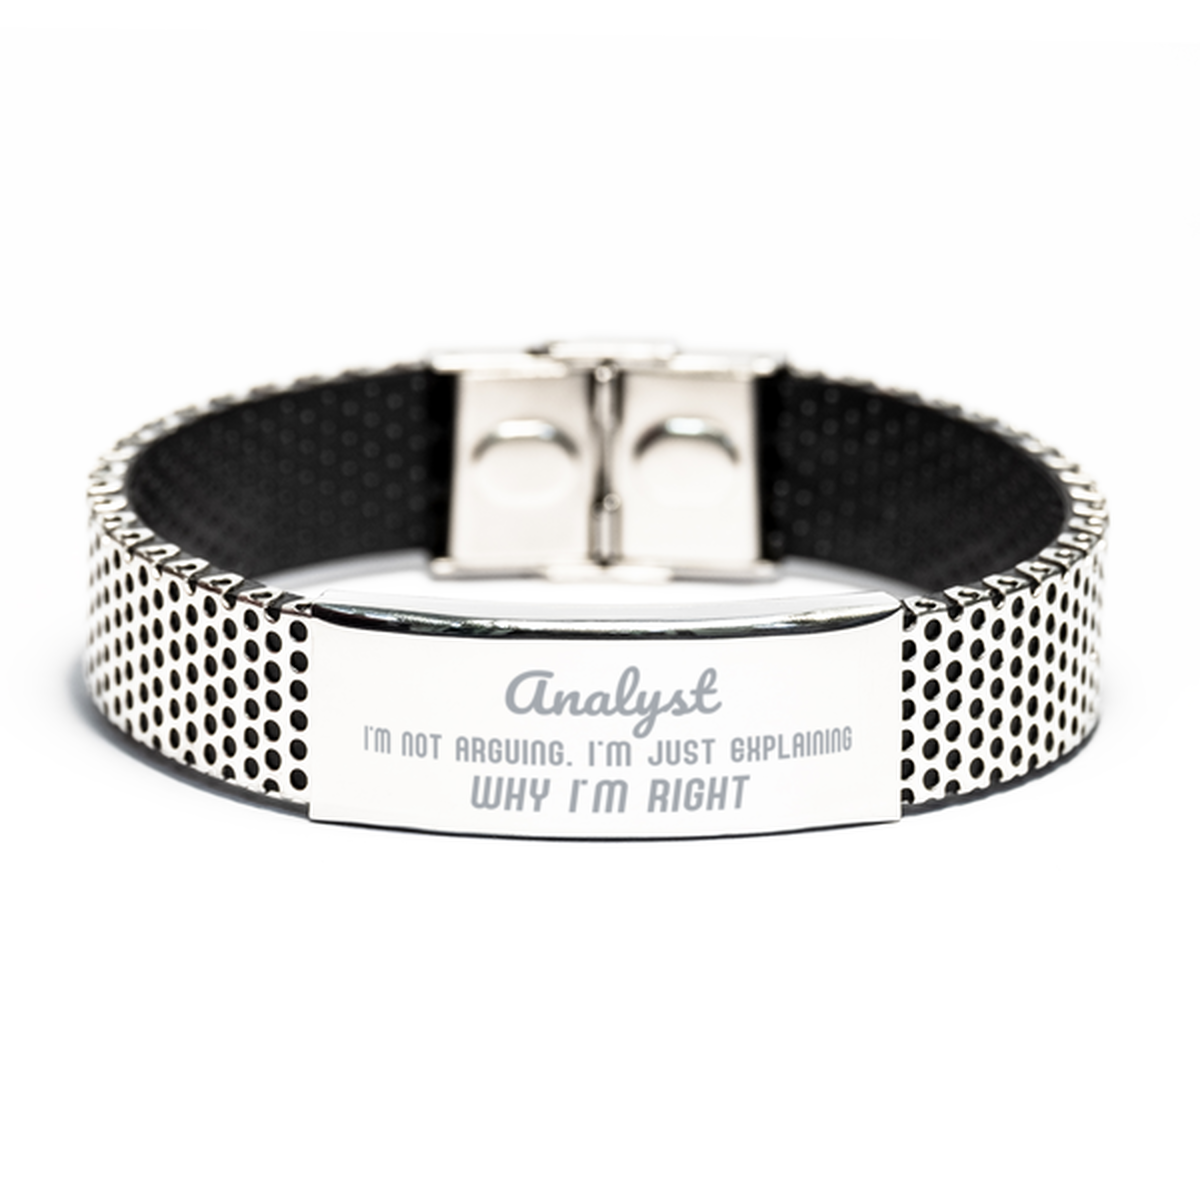 Analyst I'm not Arguing. I'm Just Explaining Why I'm RIGHT Stainless Steel Bracelet, Funny Saying Quote Analyst Gifts For Analyst Graduation Birthday Christmas Gifts for Men Women Coworker